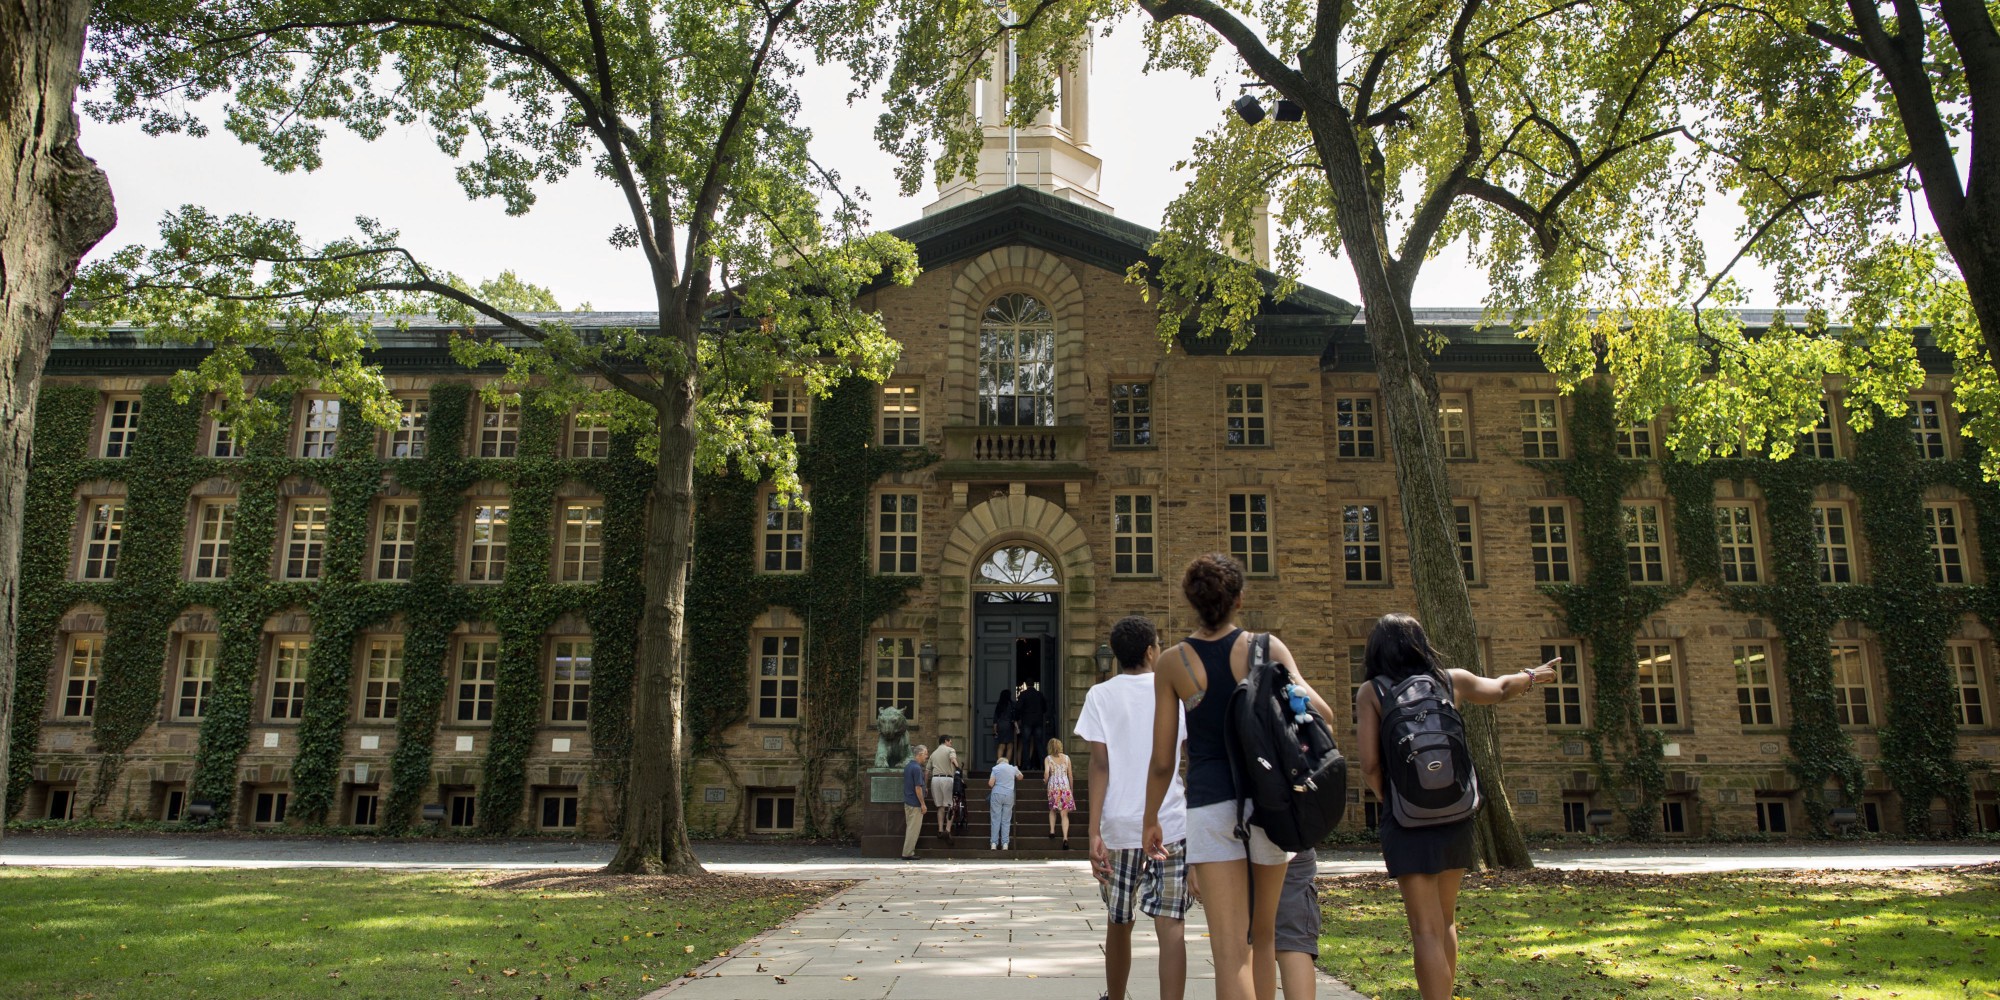 princeton university clubs coolest campus fortgang tal letter open assault ix sexual title privilege reflections min read bloomberg via getty